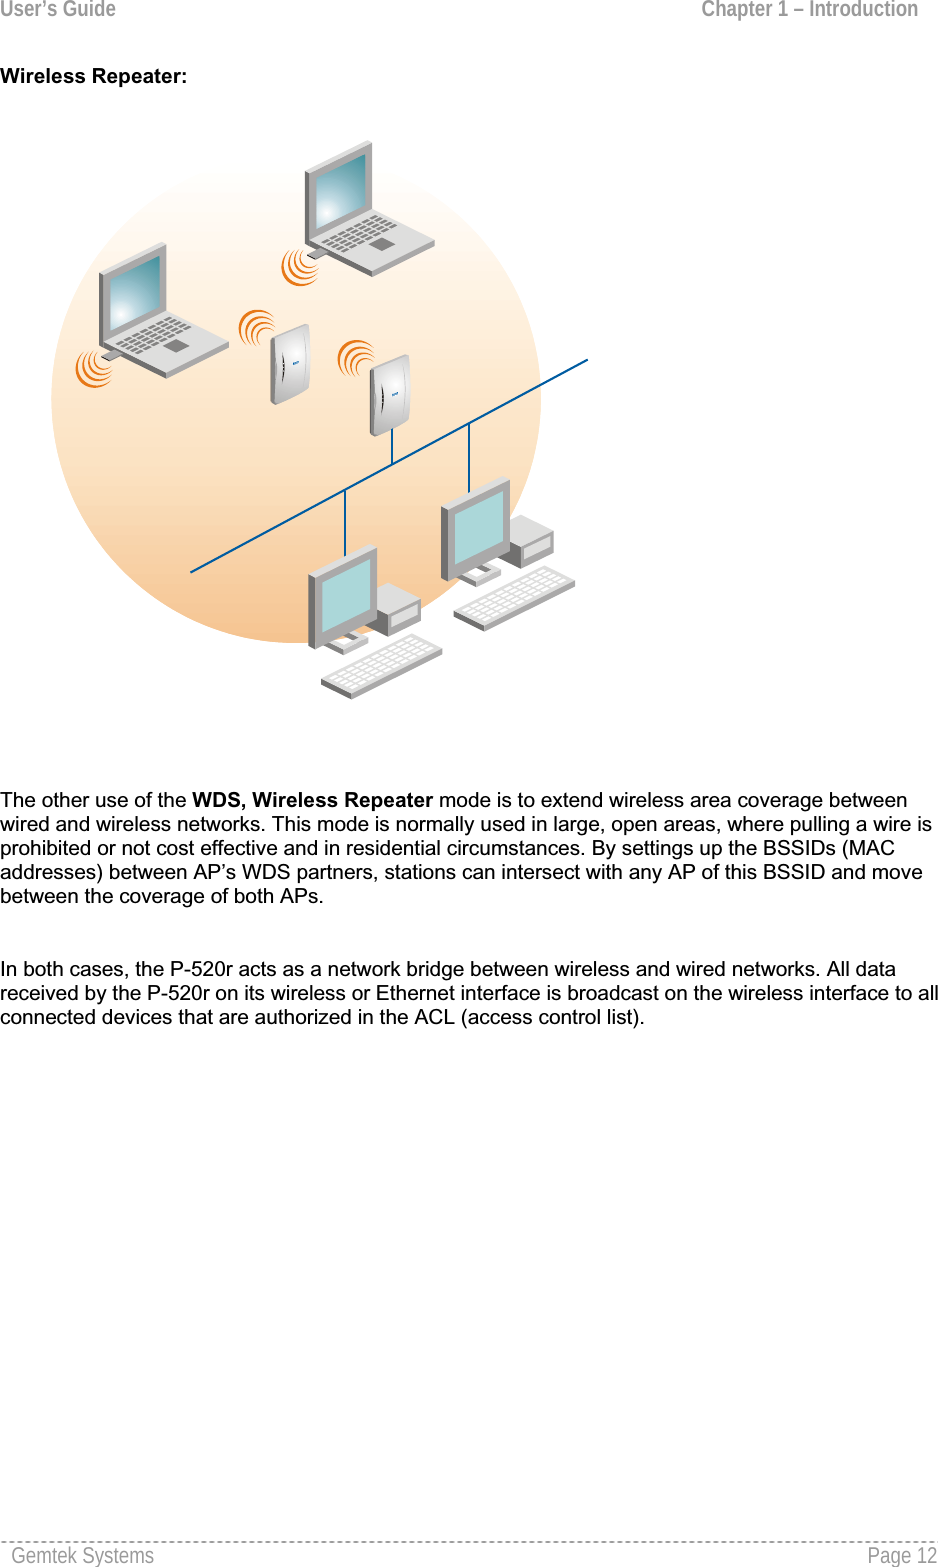 User’s Guide  Chapter 1 – Introduction Wireless Repeater:The other use of the WDS, Wireless Repeater mode is to extend wireless area coverage betweenwired and wireless networks. This mode is normally used in large, open areas, where pulling a wire is prohibited or not cost effective and in residential circumstances. By settings up the BSSIDs (MAC addresses) between AP’s WDS partners, stations can intersect with any AP of this BSSID and move between the coverage of both APs. In both cases, the P-520r acts as a network bridge between wireless and wired networks. All data received by the P-520r on its wireless or Ethernet interface is broadcast on the wireless interface to all connected devices that are authorized in the ACL (access control list). Gemtek Systems  Page 12